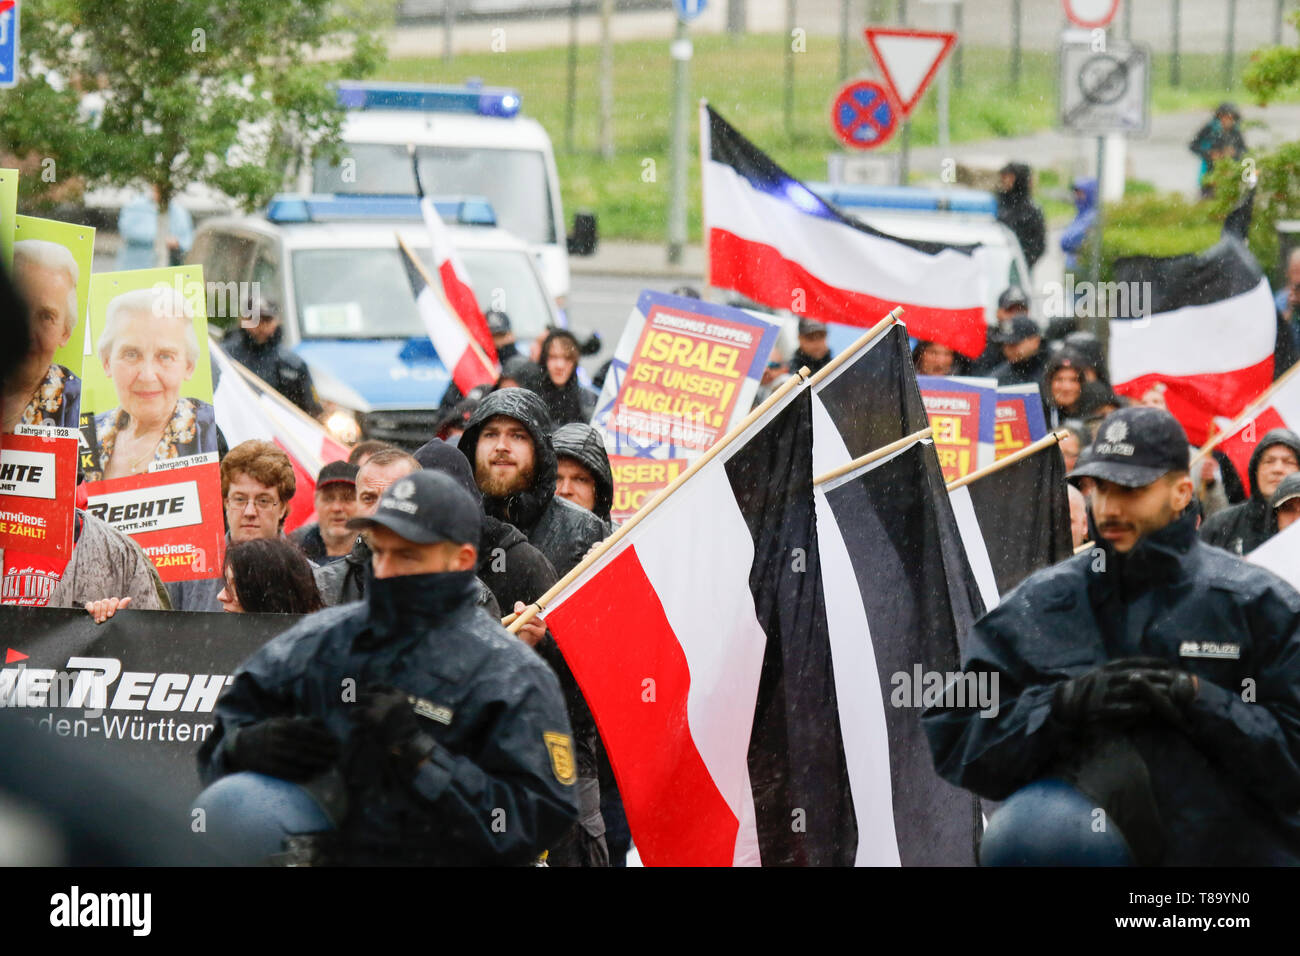 Pforzheim, Germany. 11th May 2019. The right-wing protesters march with banners, posters and flags of the German Empire through the city centre in the pouring rain. Around 80 people participated in a march through Pforzheim, organised by the right-wing party ‘Die Rechte’ (The Right). The main issues of the march was the promotion of voting for Die Rechte’ in the upcoming European Election and their anti-immigration policies. They were confronted by several hundred counter-protesters from different political organisations. Stock Photo